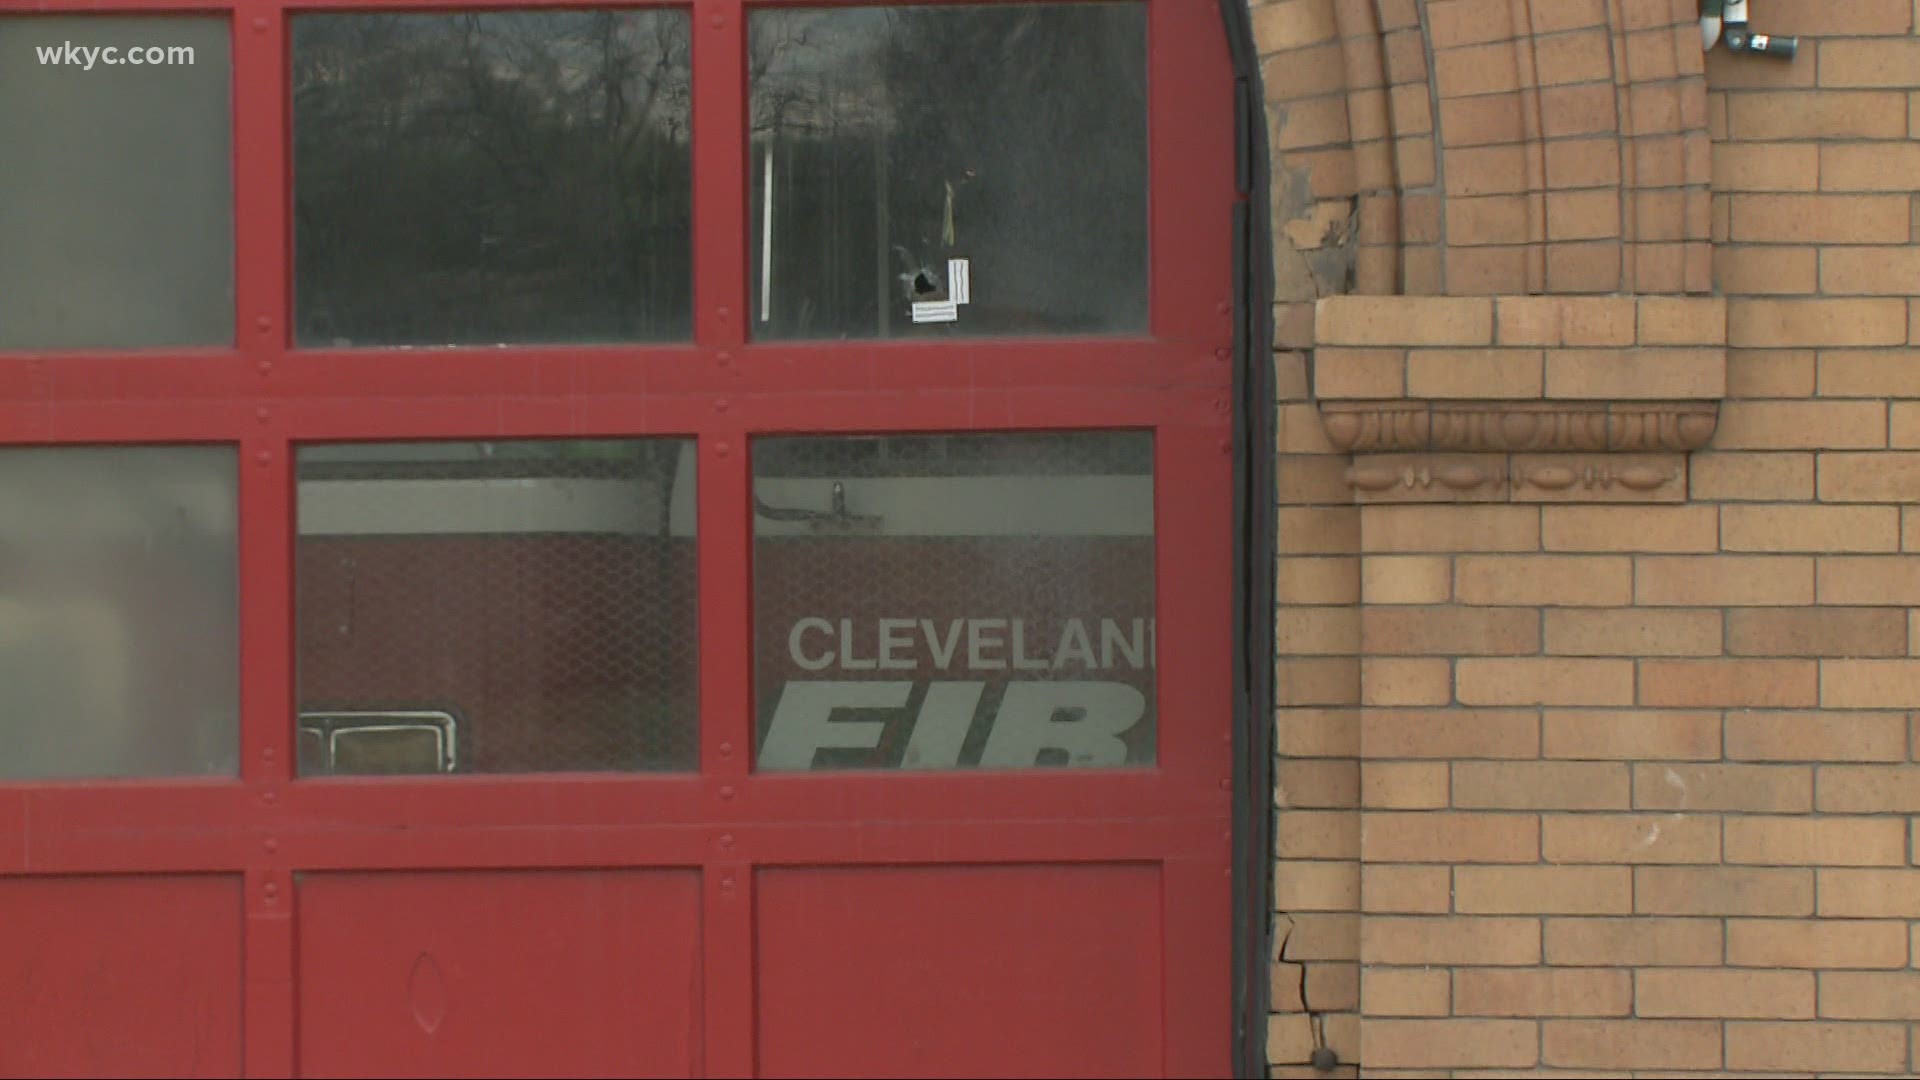 The Cleveland Division of Fire reported minor damage to both the fire station's door and one of the fire engines. No firefighters or civilians were injured.